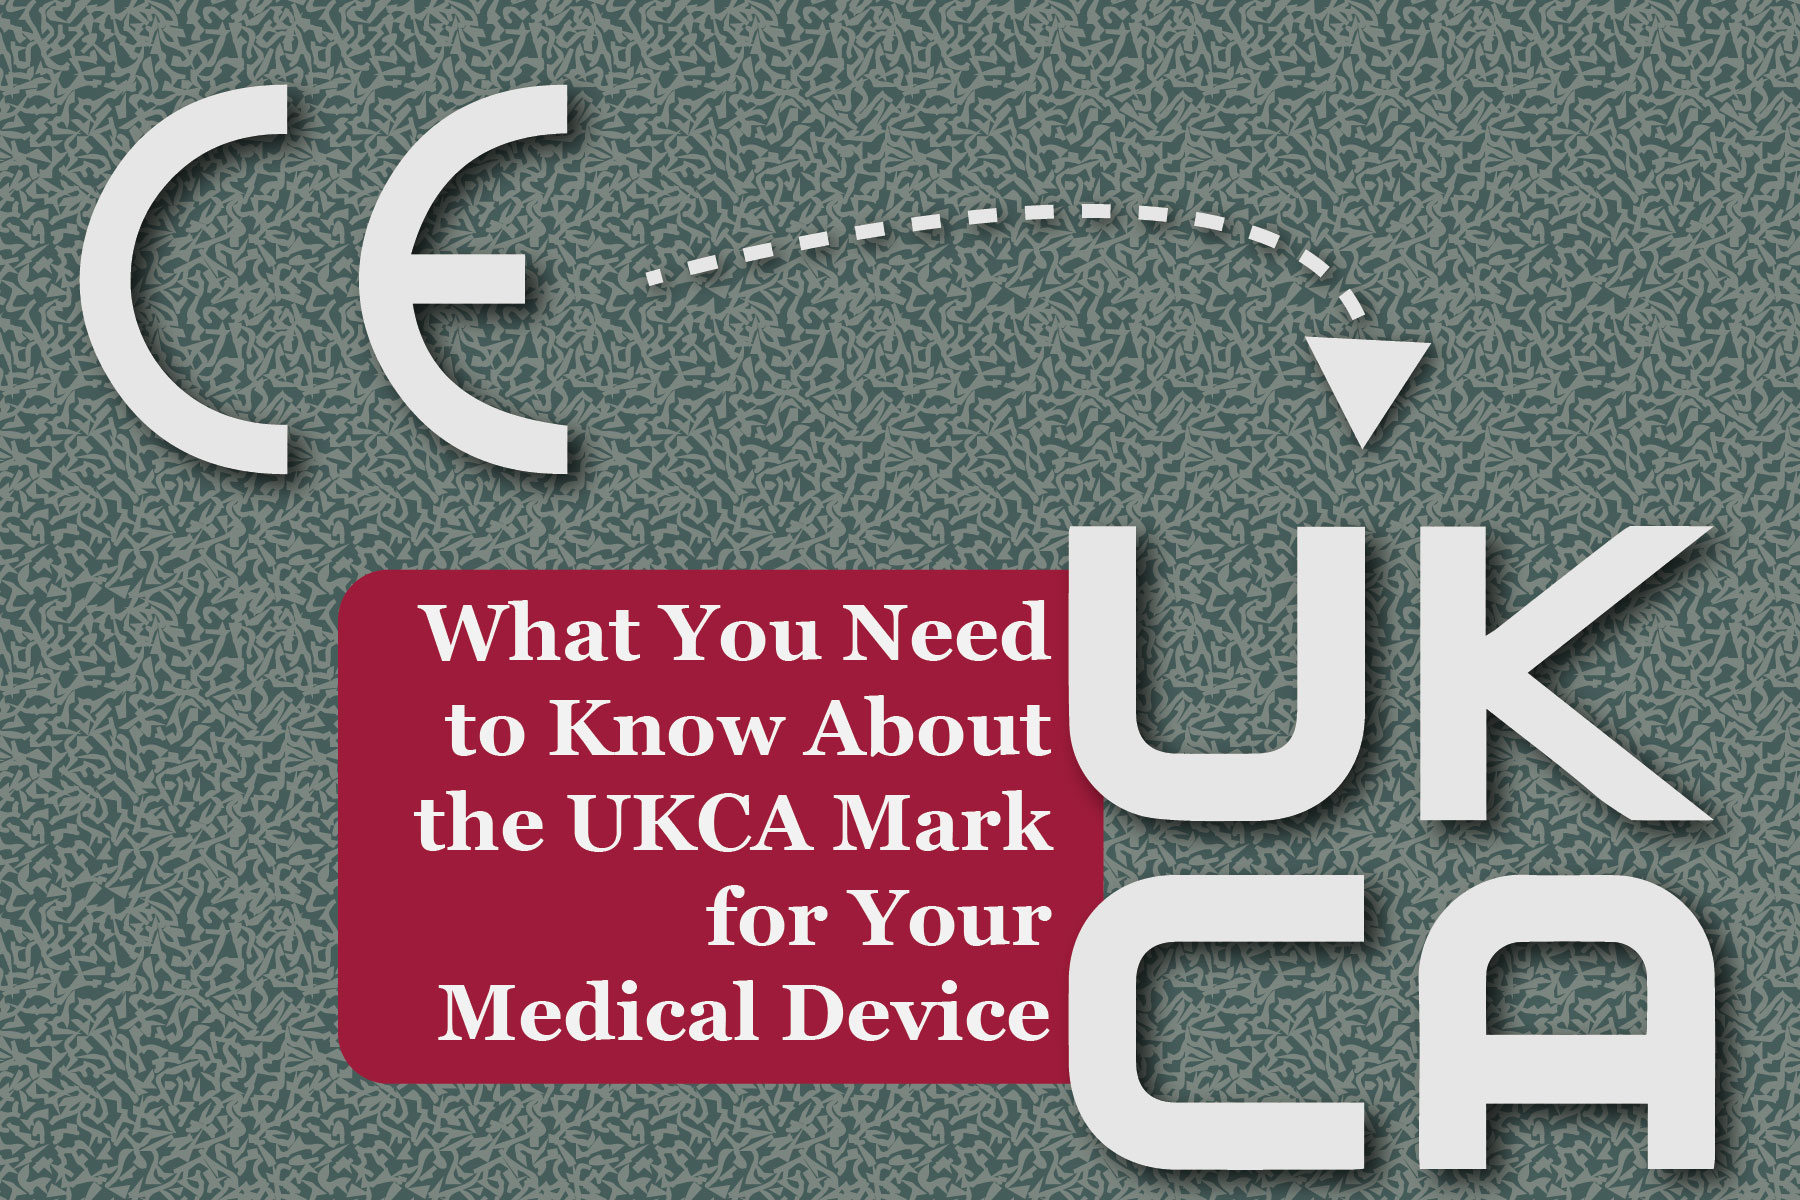 What You Need to Know About the UKCA Mark for Your Medical Device